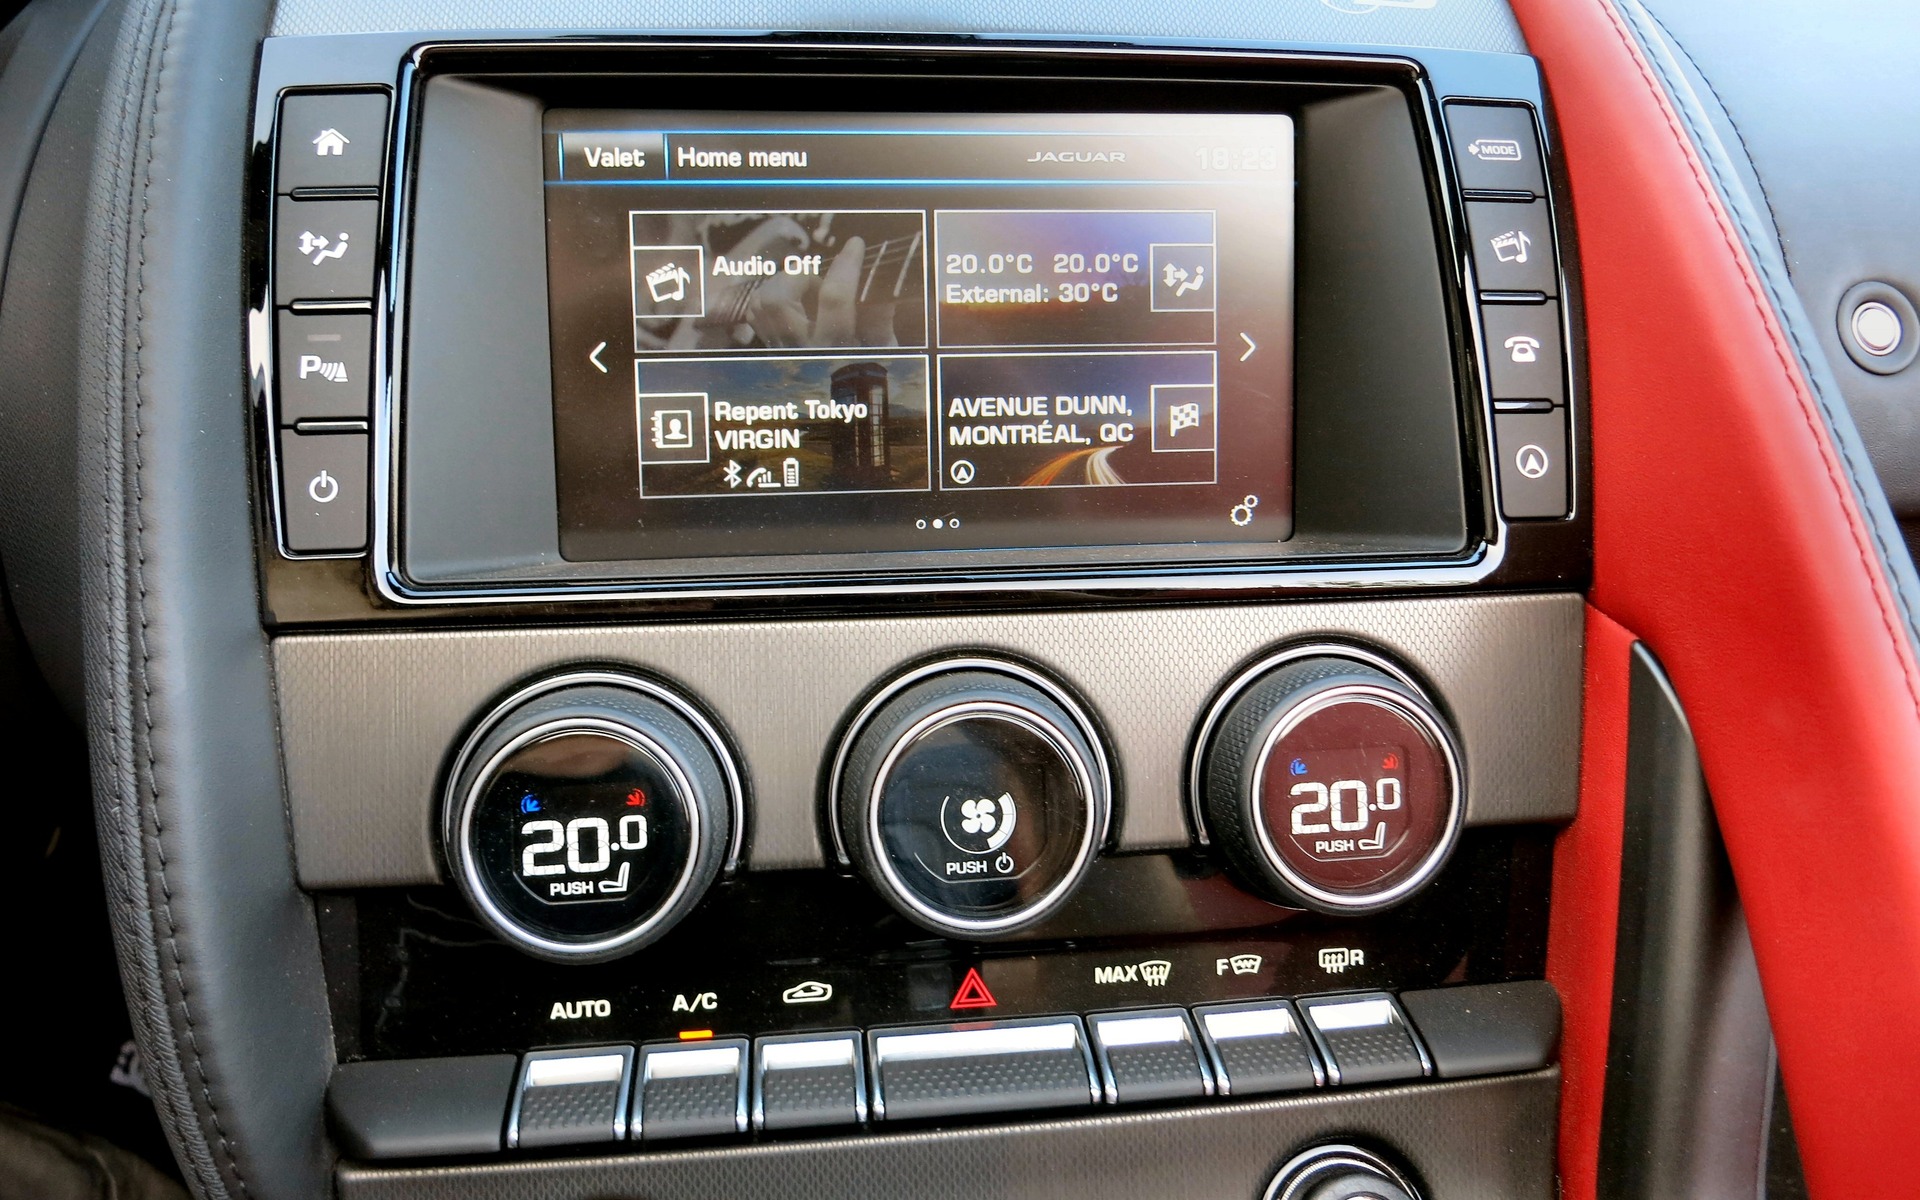 Infotainment continues to be a weak point for Jaguar.